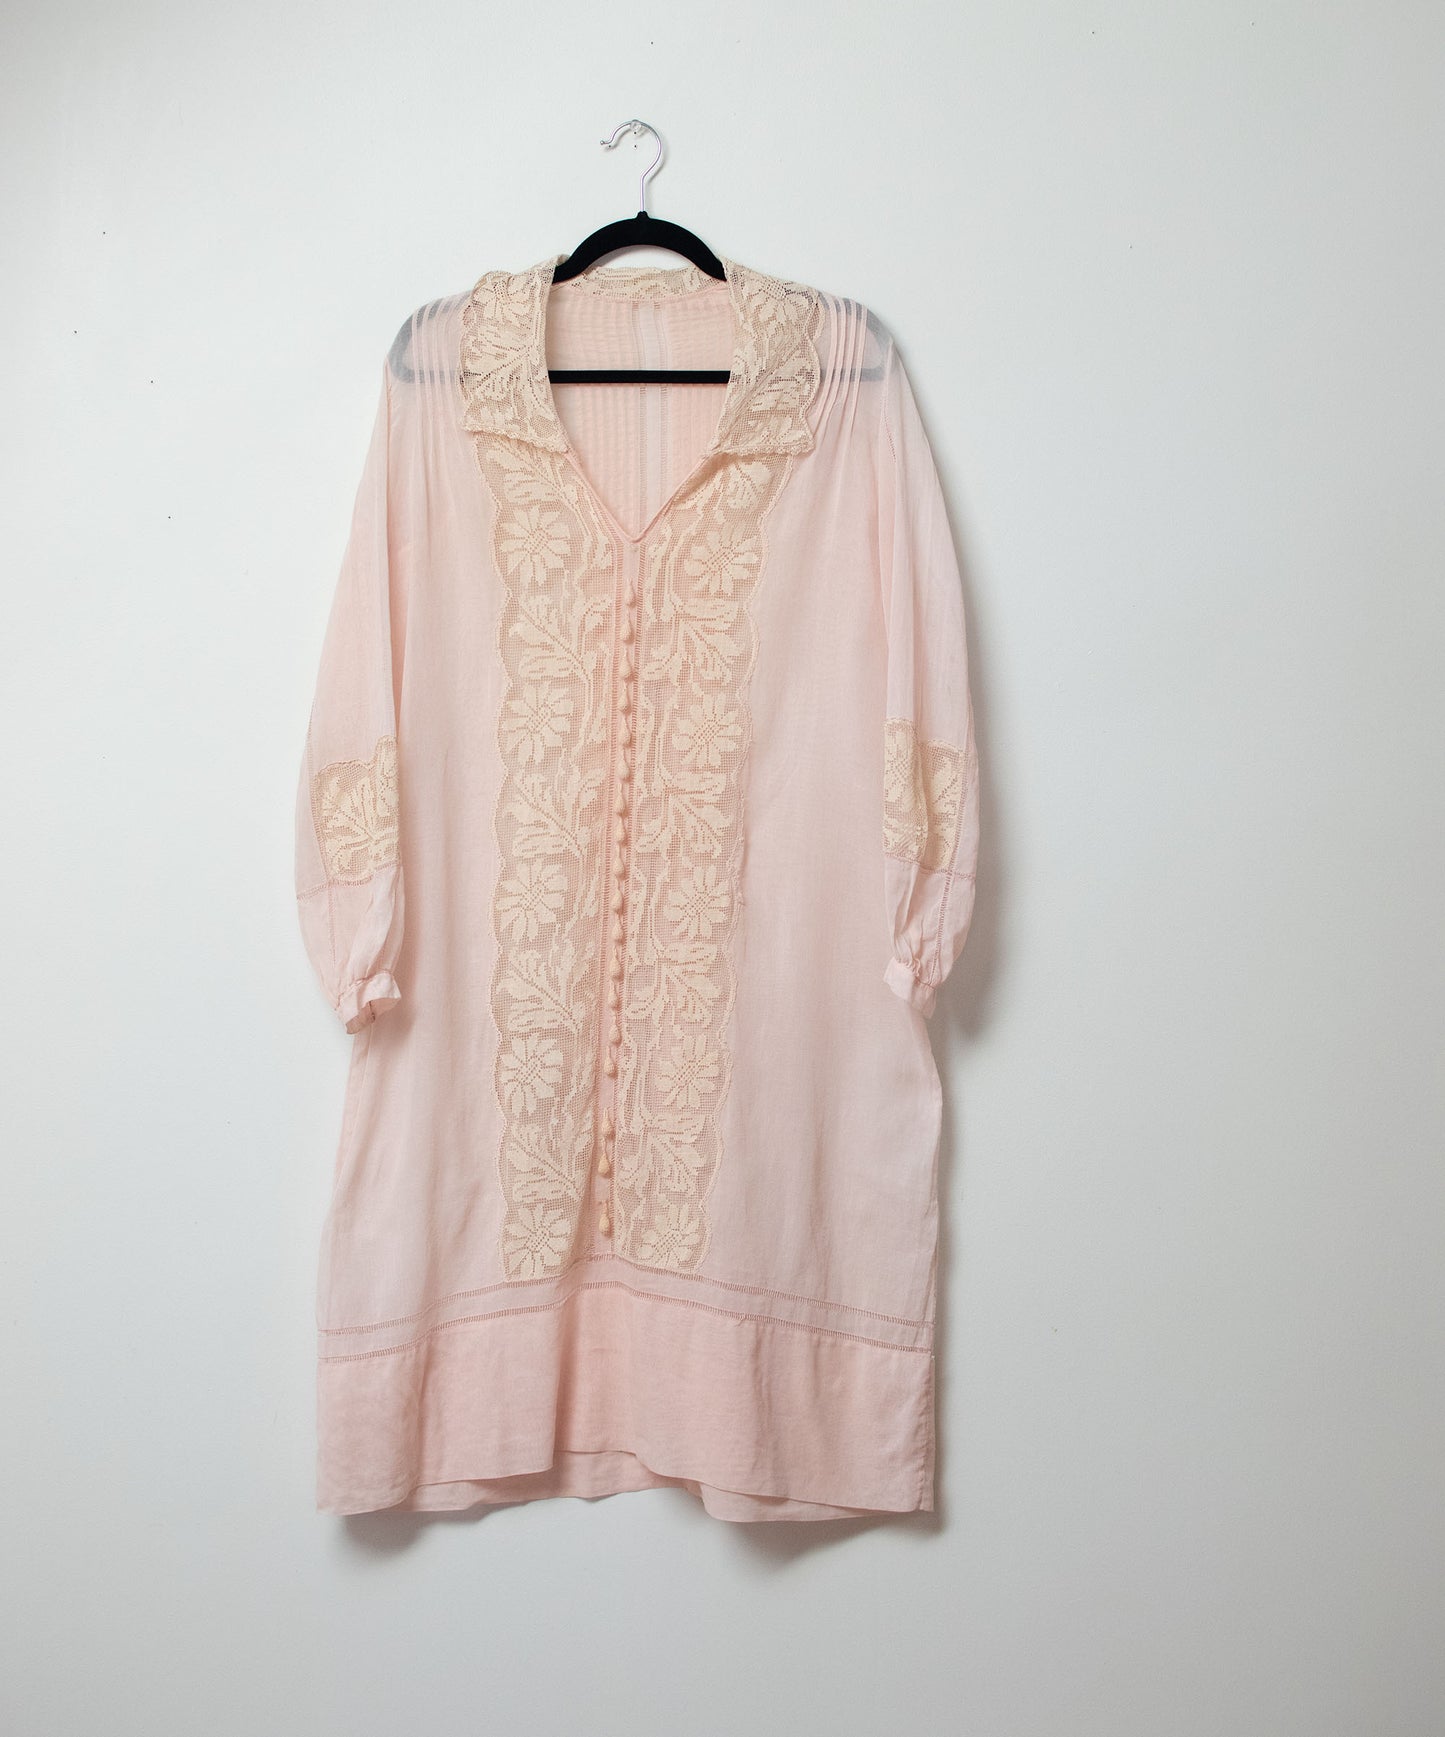 1920s Pale Pink Cotton and Lace Dress